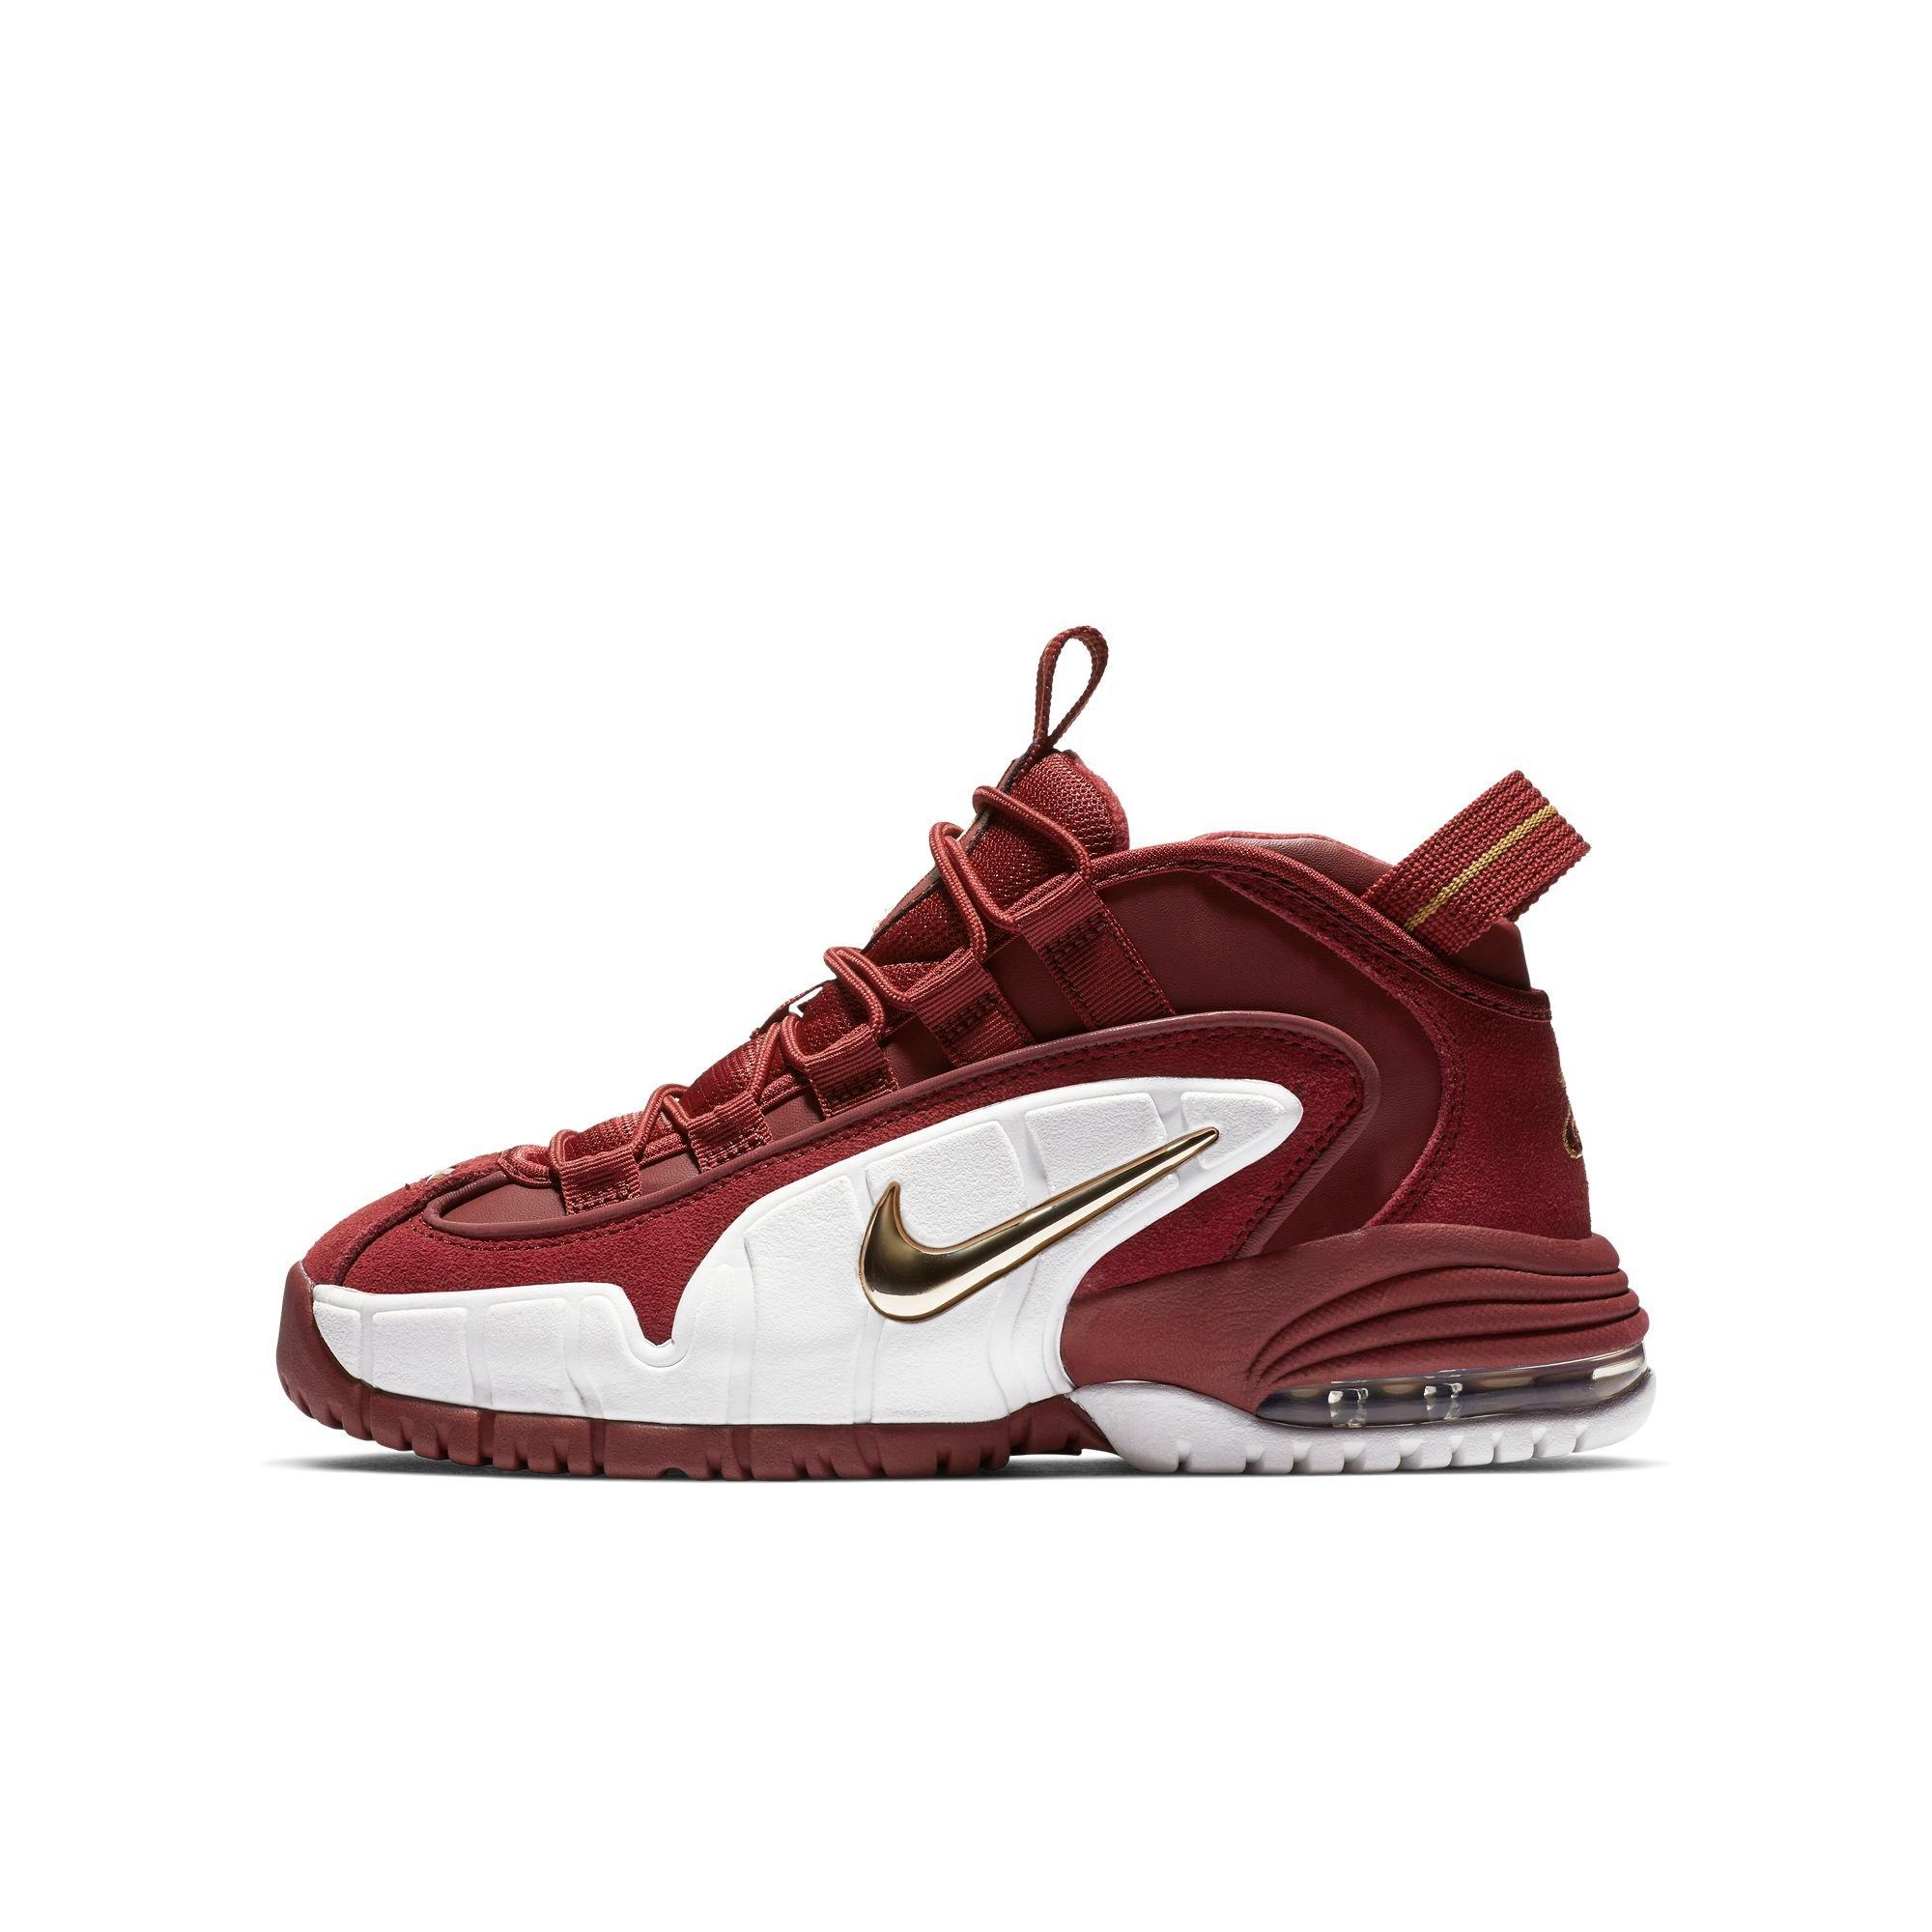 burgundy and gold air max